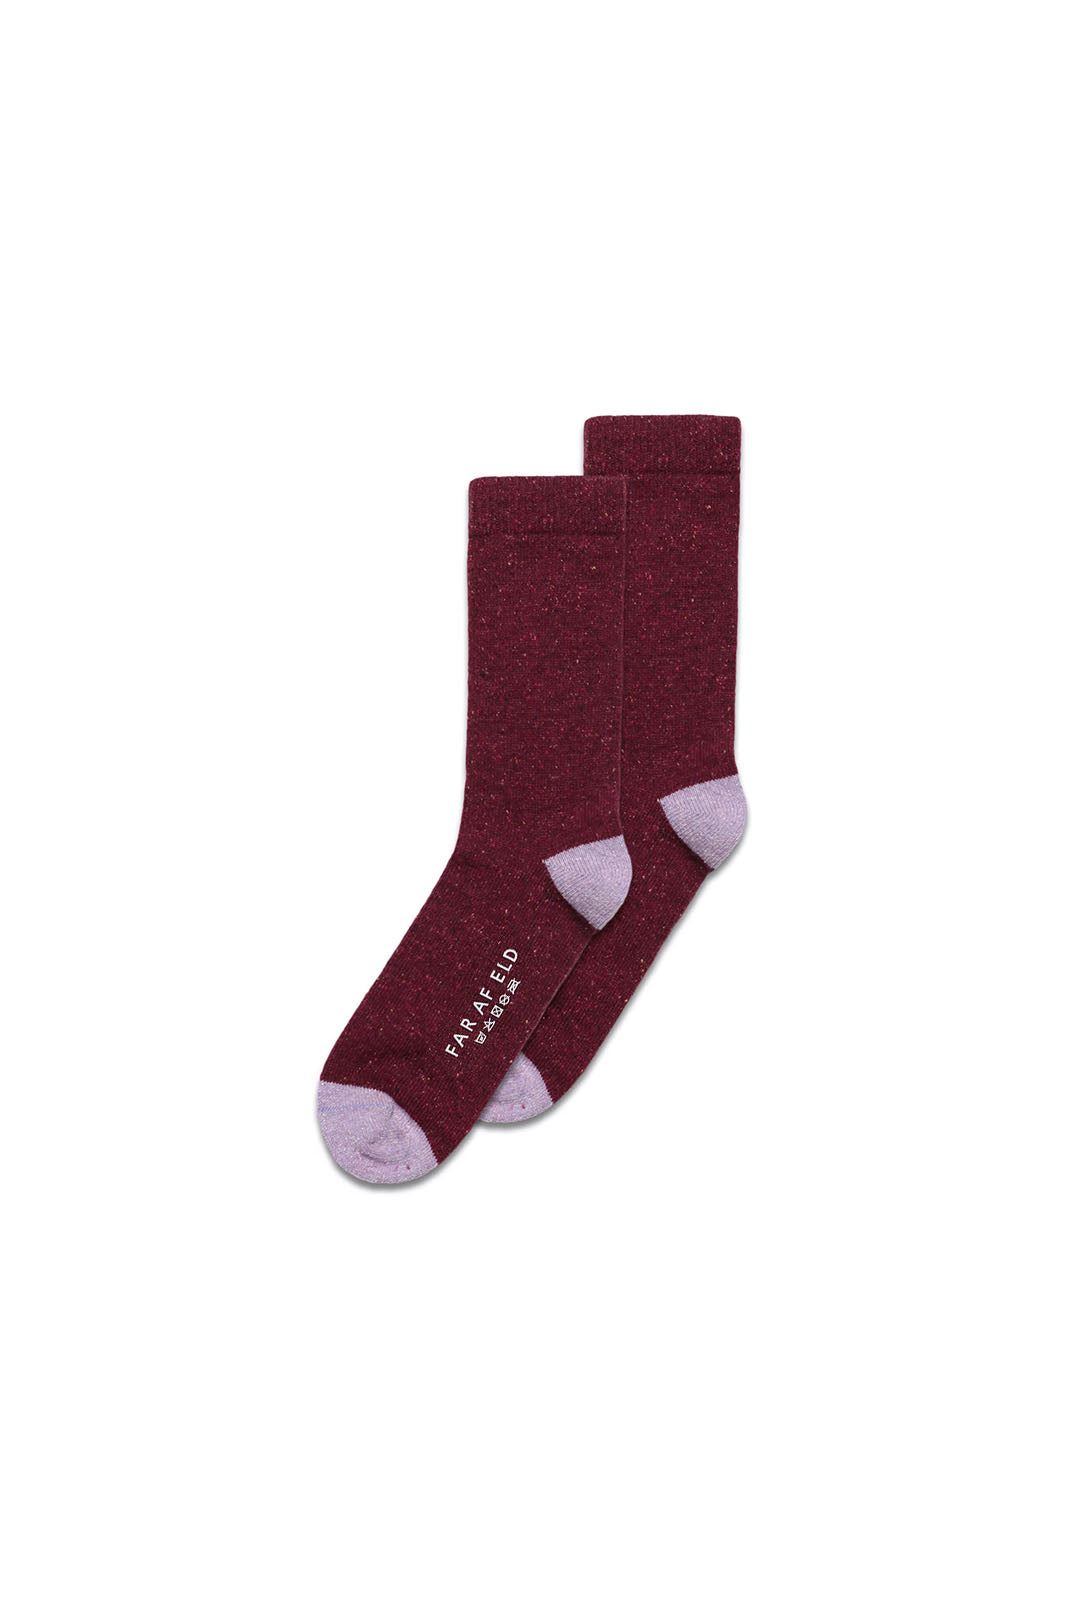 Magenta knit socks with flecks of texture and color and a lavender color block toe and heel.